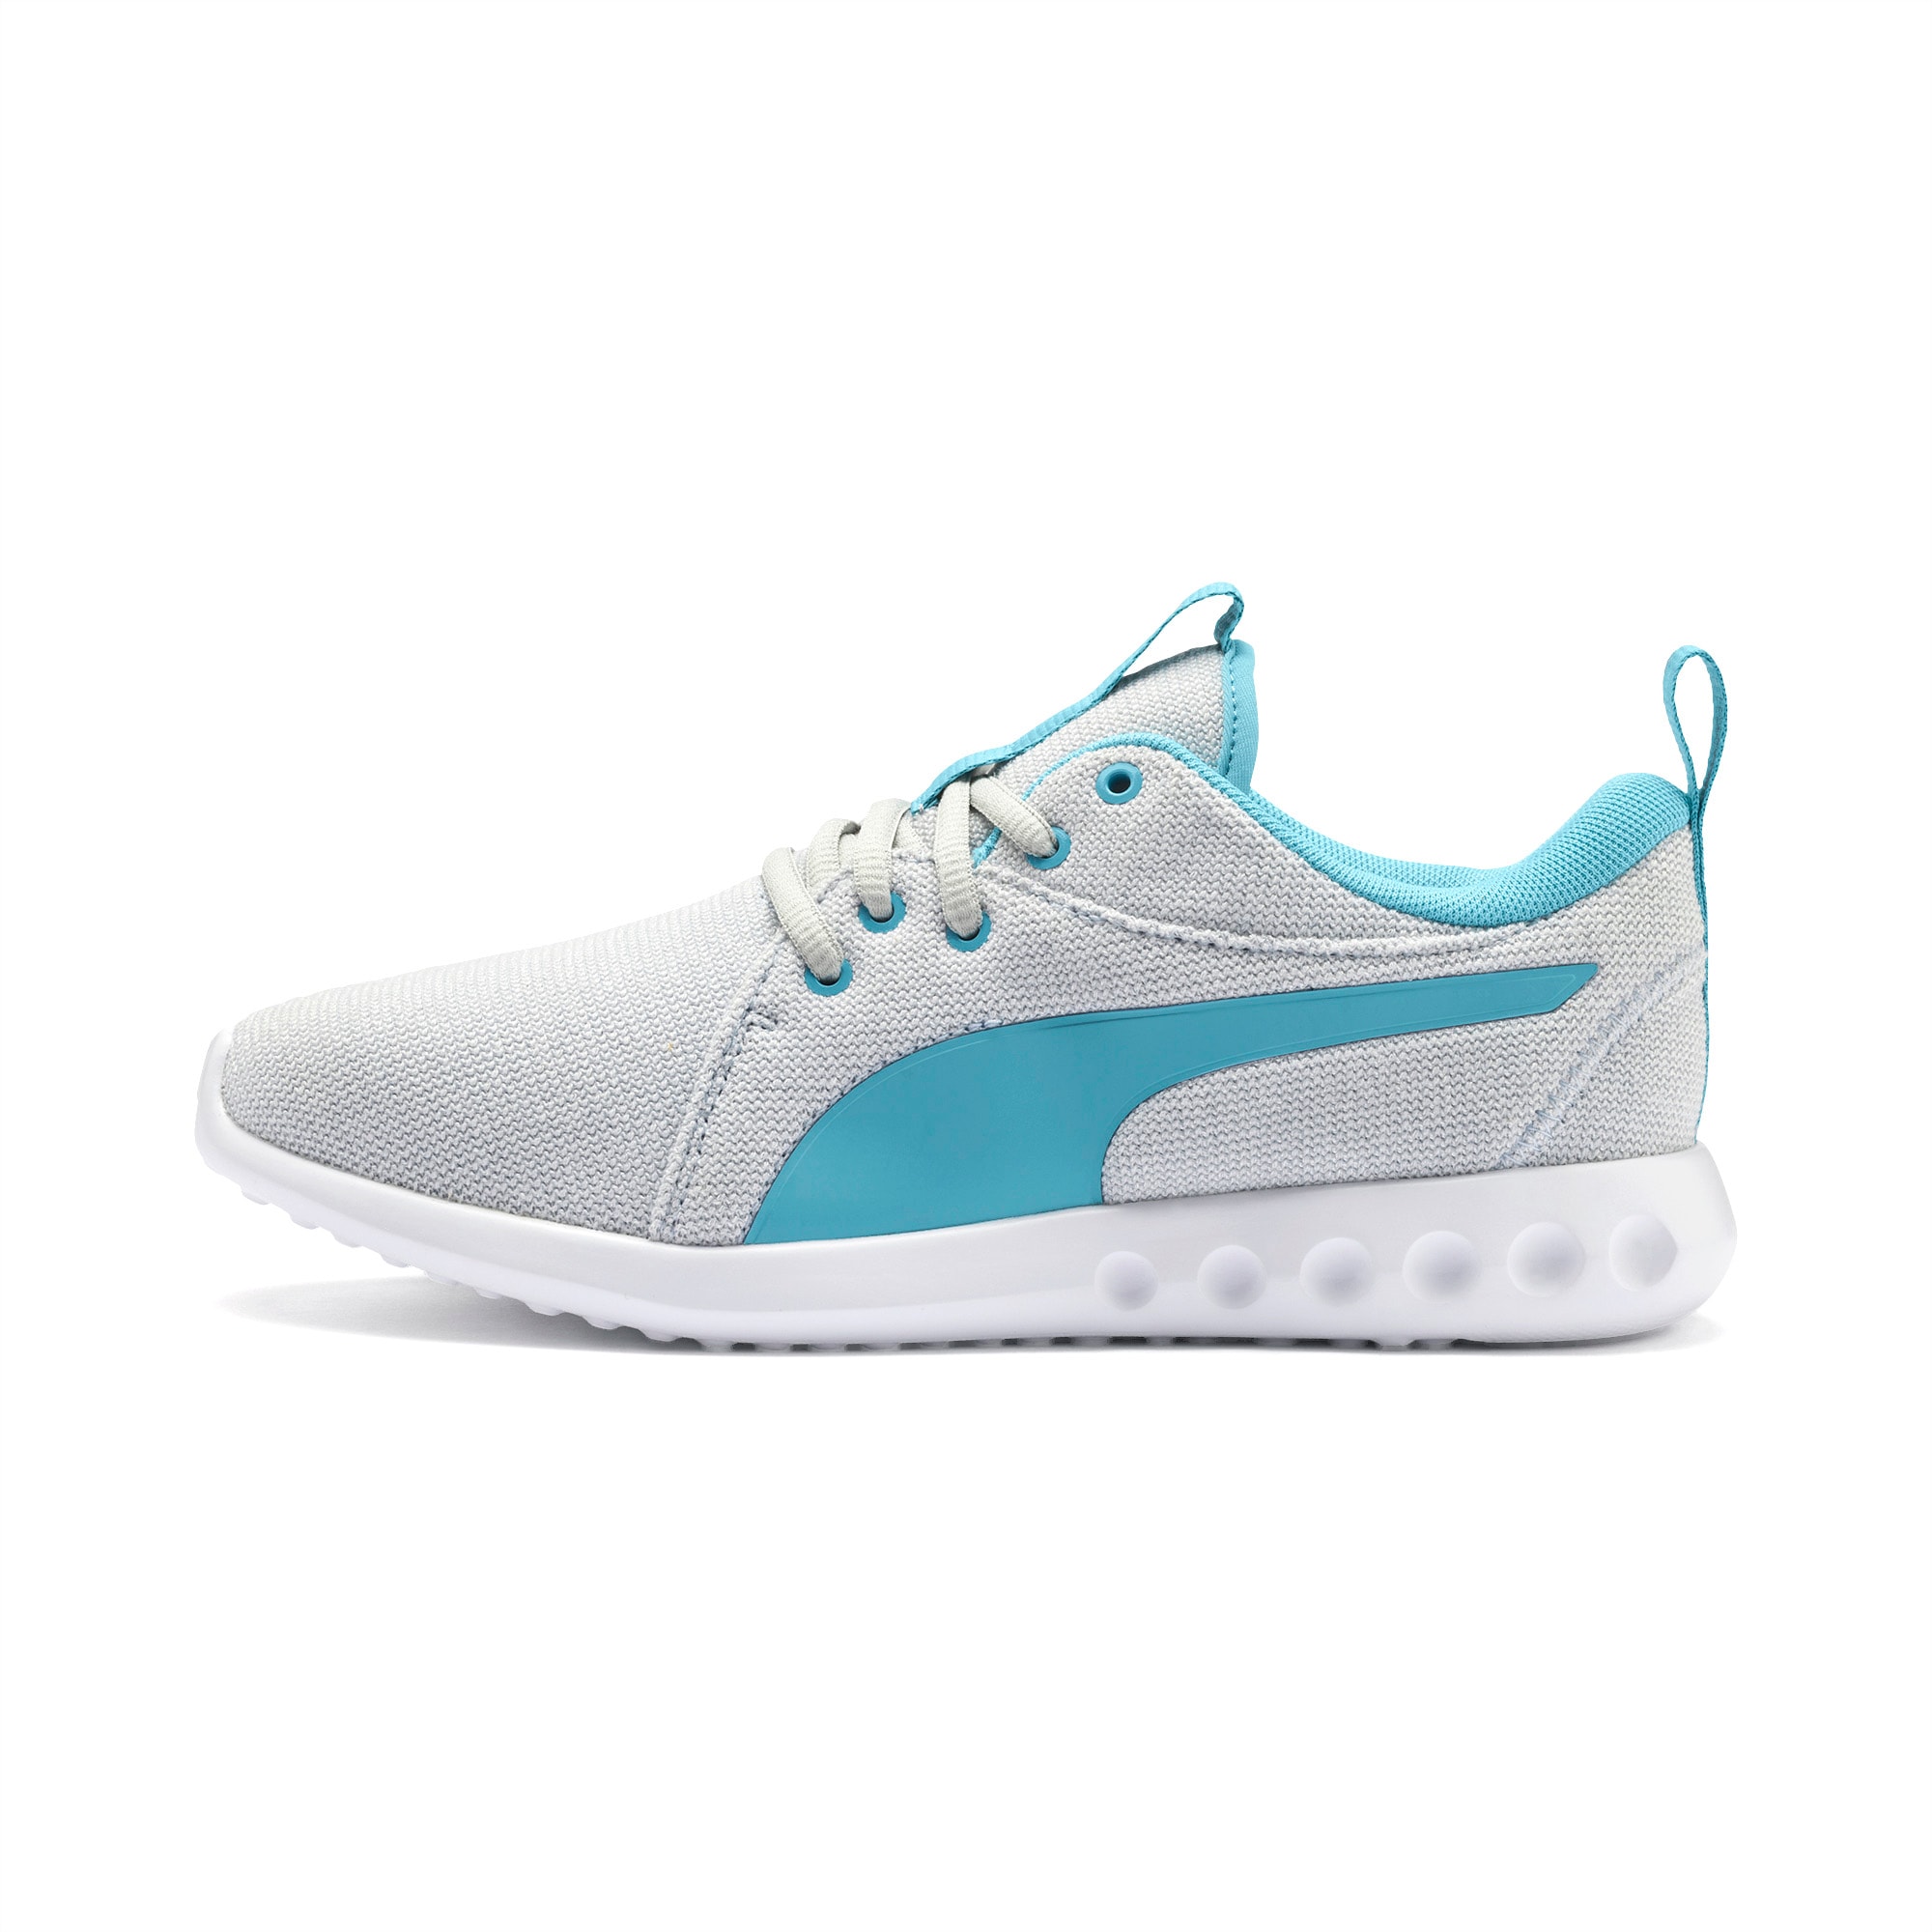 Carson 2 Knit Women's Running Shoes 